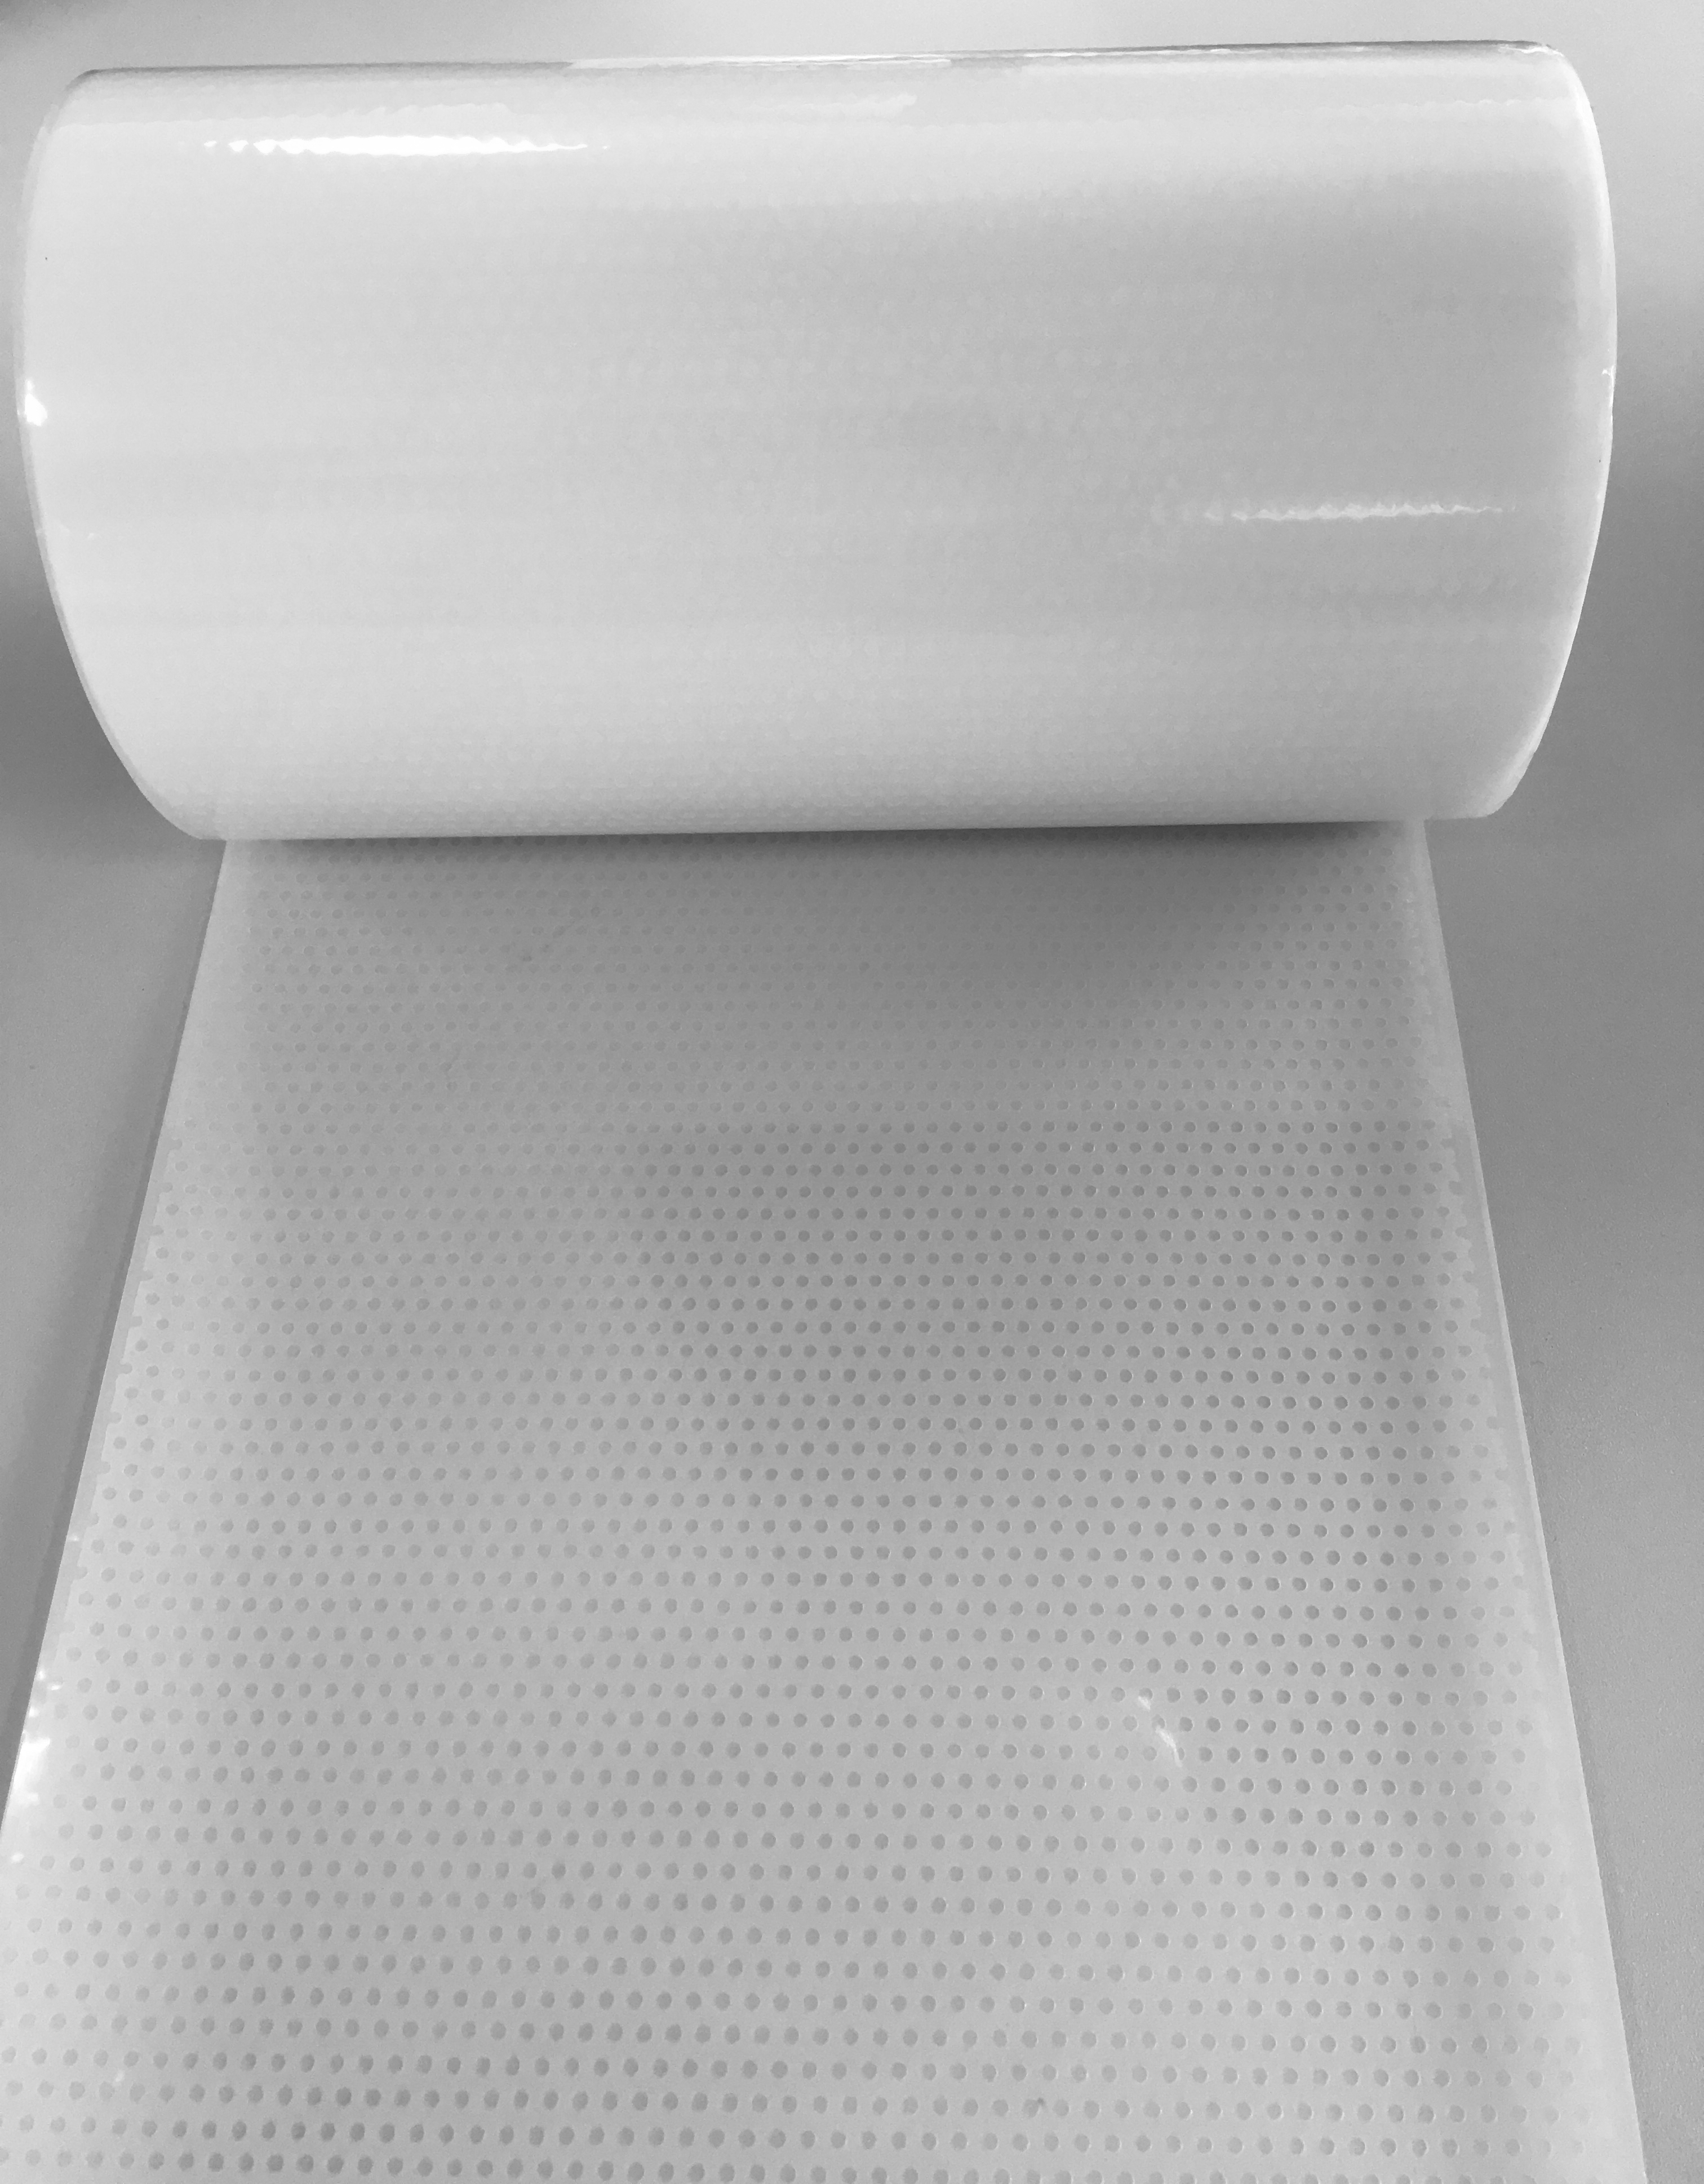 <ul><li>Single-sided non-woven and silicone gel for the manufacture of medical devices, standard or post-operative dressings etc.</li><li>Perforated double-sided PU film and silicone gel for the manufacture of medical devices and the assembly of multilayer products</li></ul>